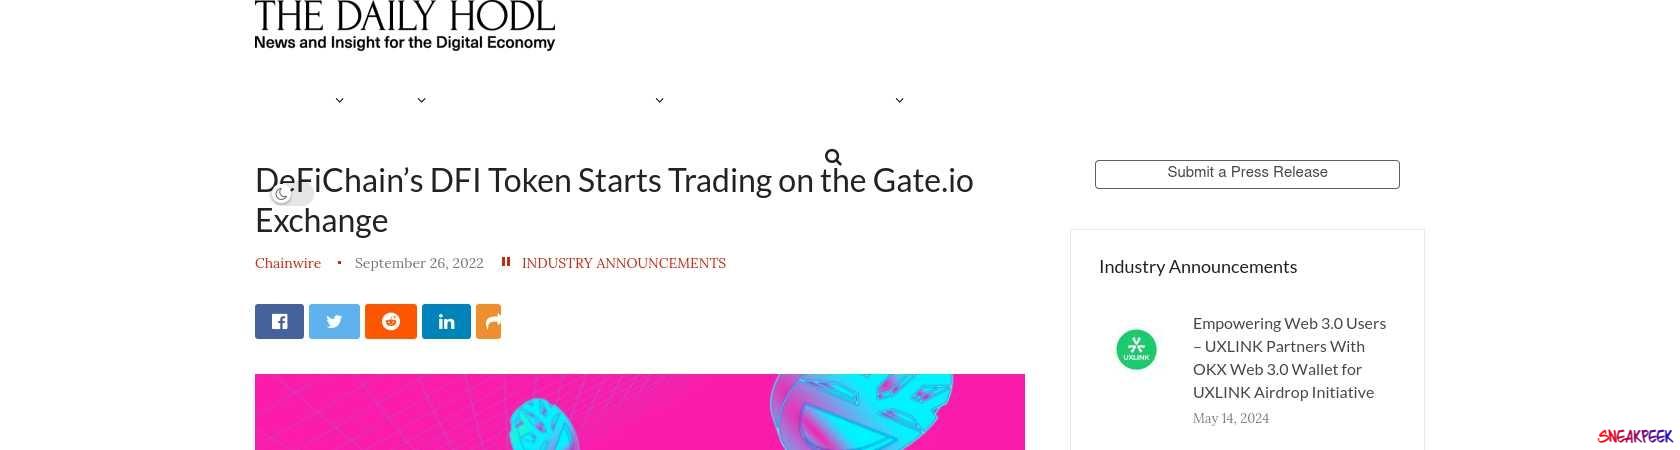 Read the full Article:  ⭲ DeFiChain’s DFI Token Starts Trading on the Gate.io Exchange